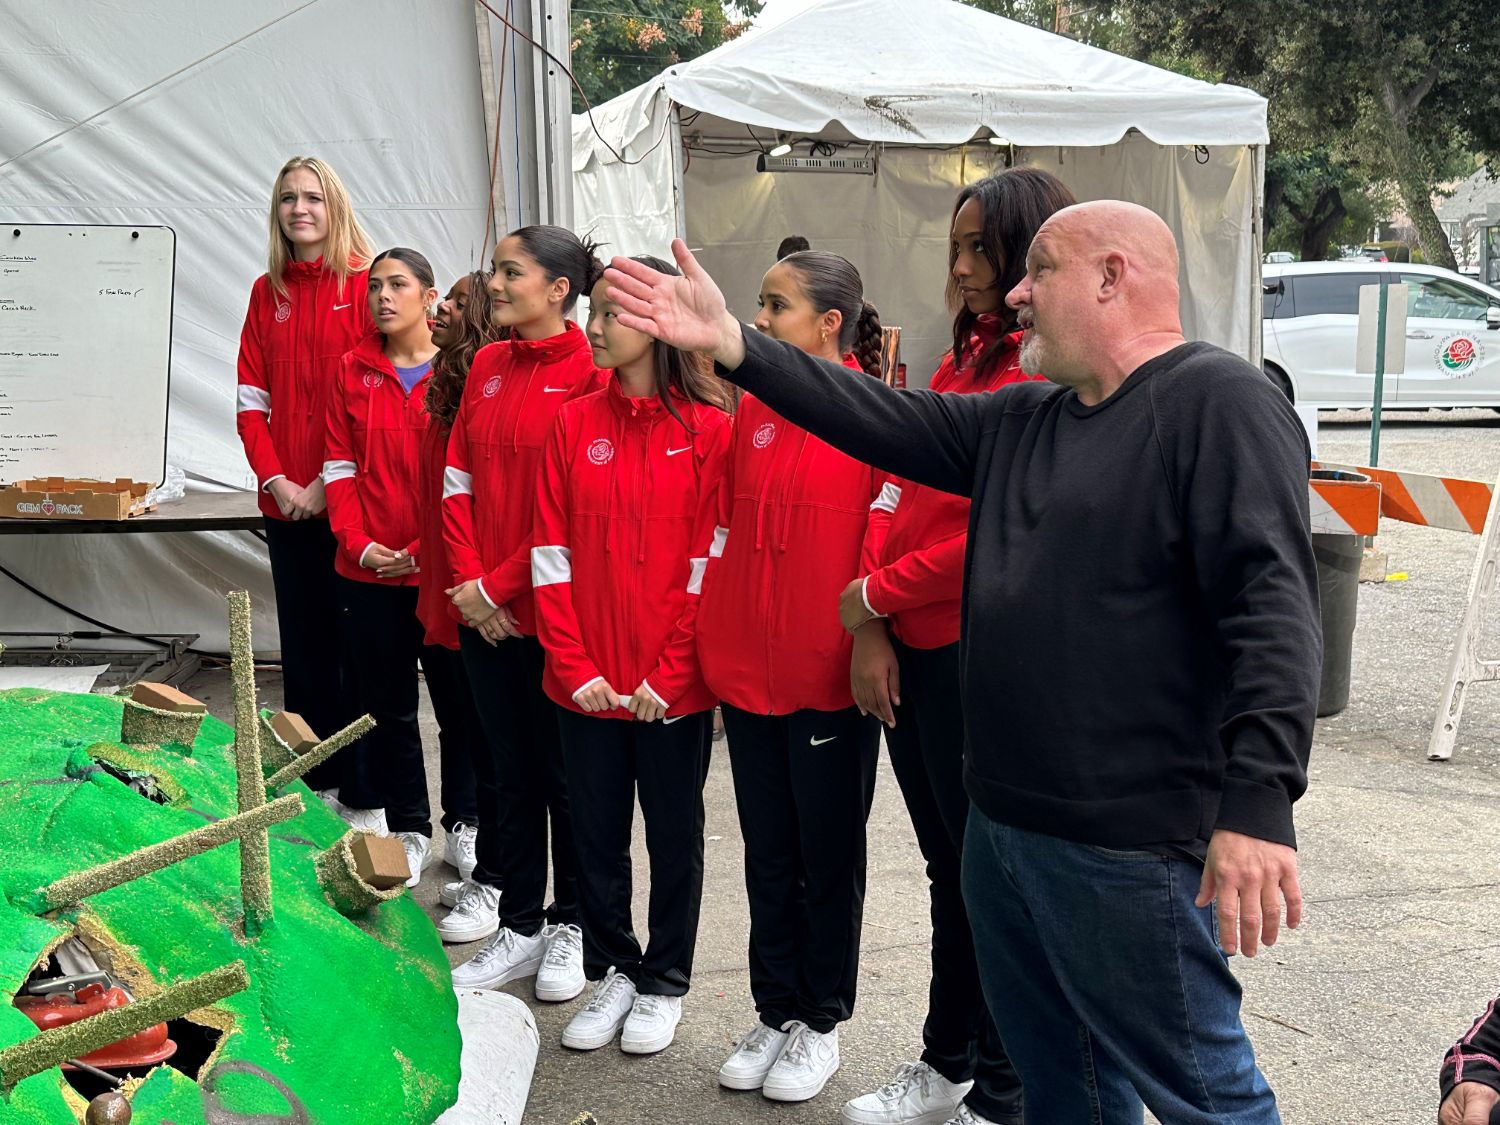 PHOTO: Bill Glazier | The South Pasadenan | South Pasadena Tournament of Roses Chair Ed Donnelly points out some of the float’s features to the Rose Court.